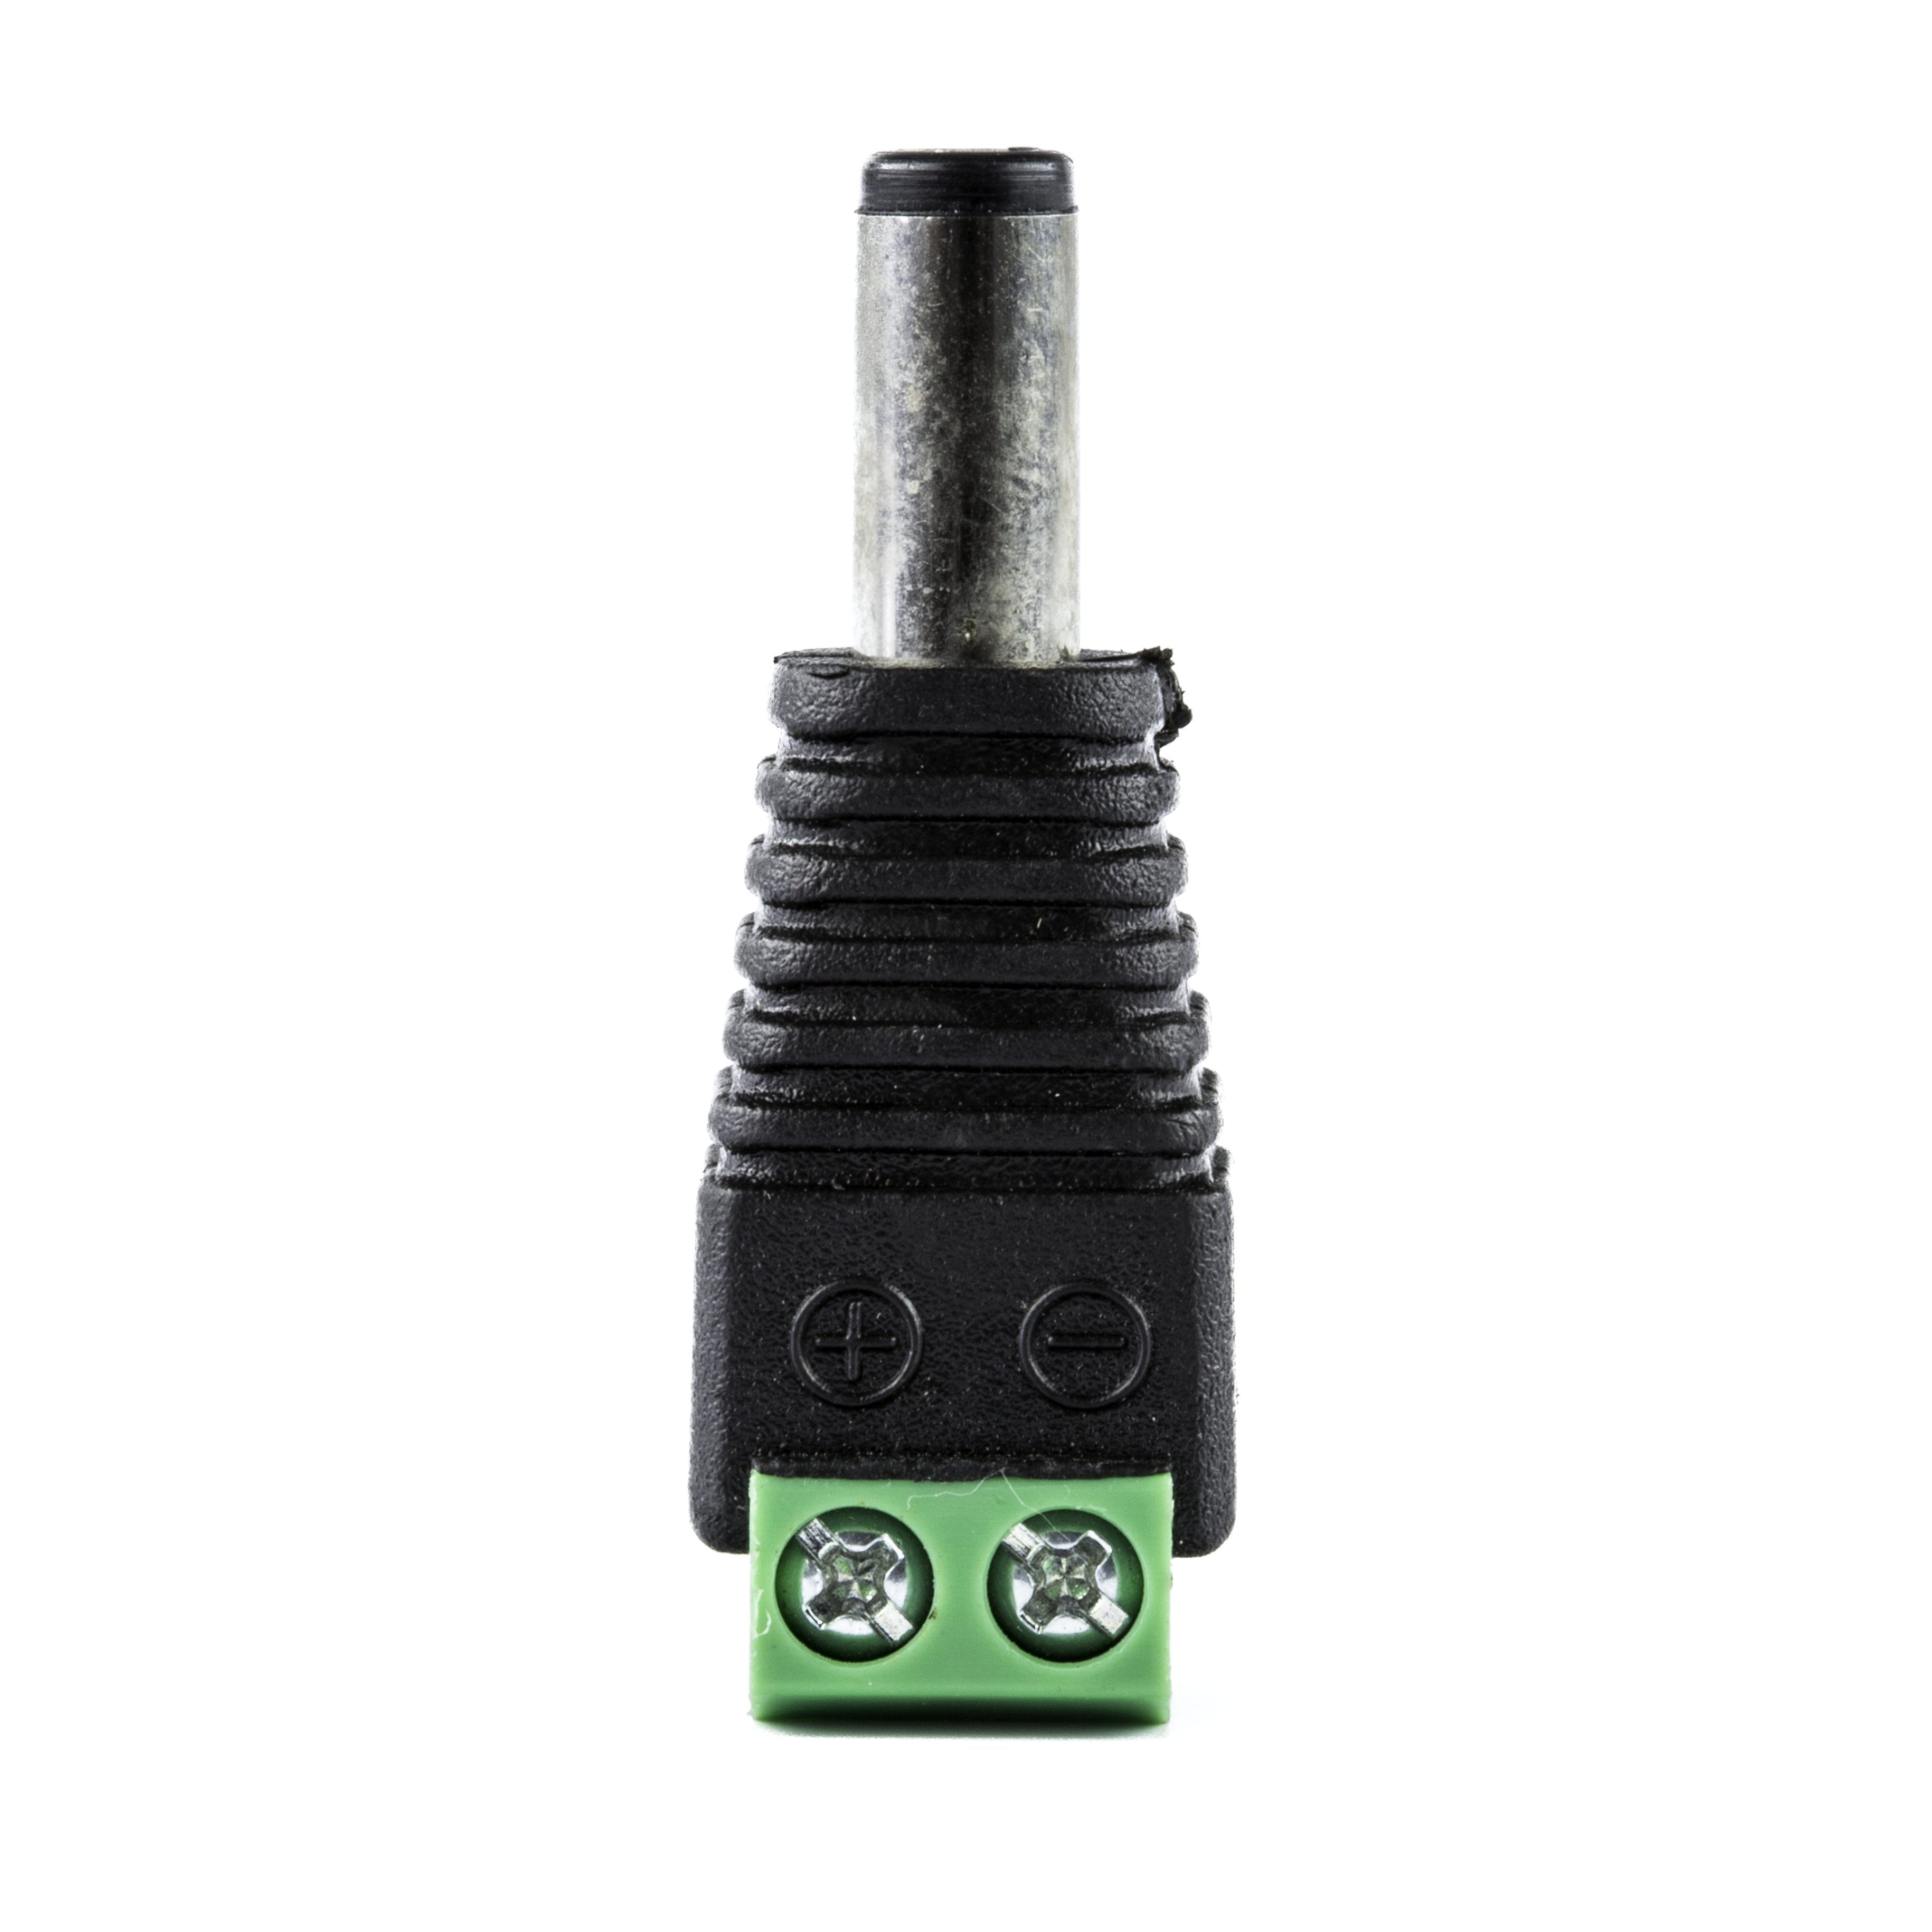 2 Pack of DC Male Connector 5.5*2.5mm